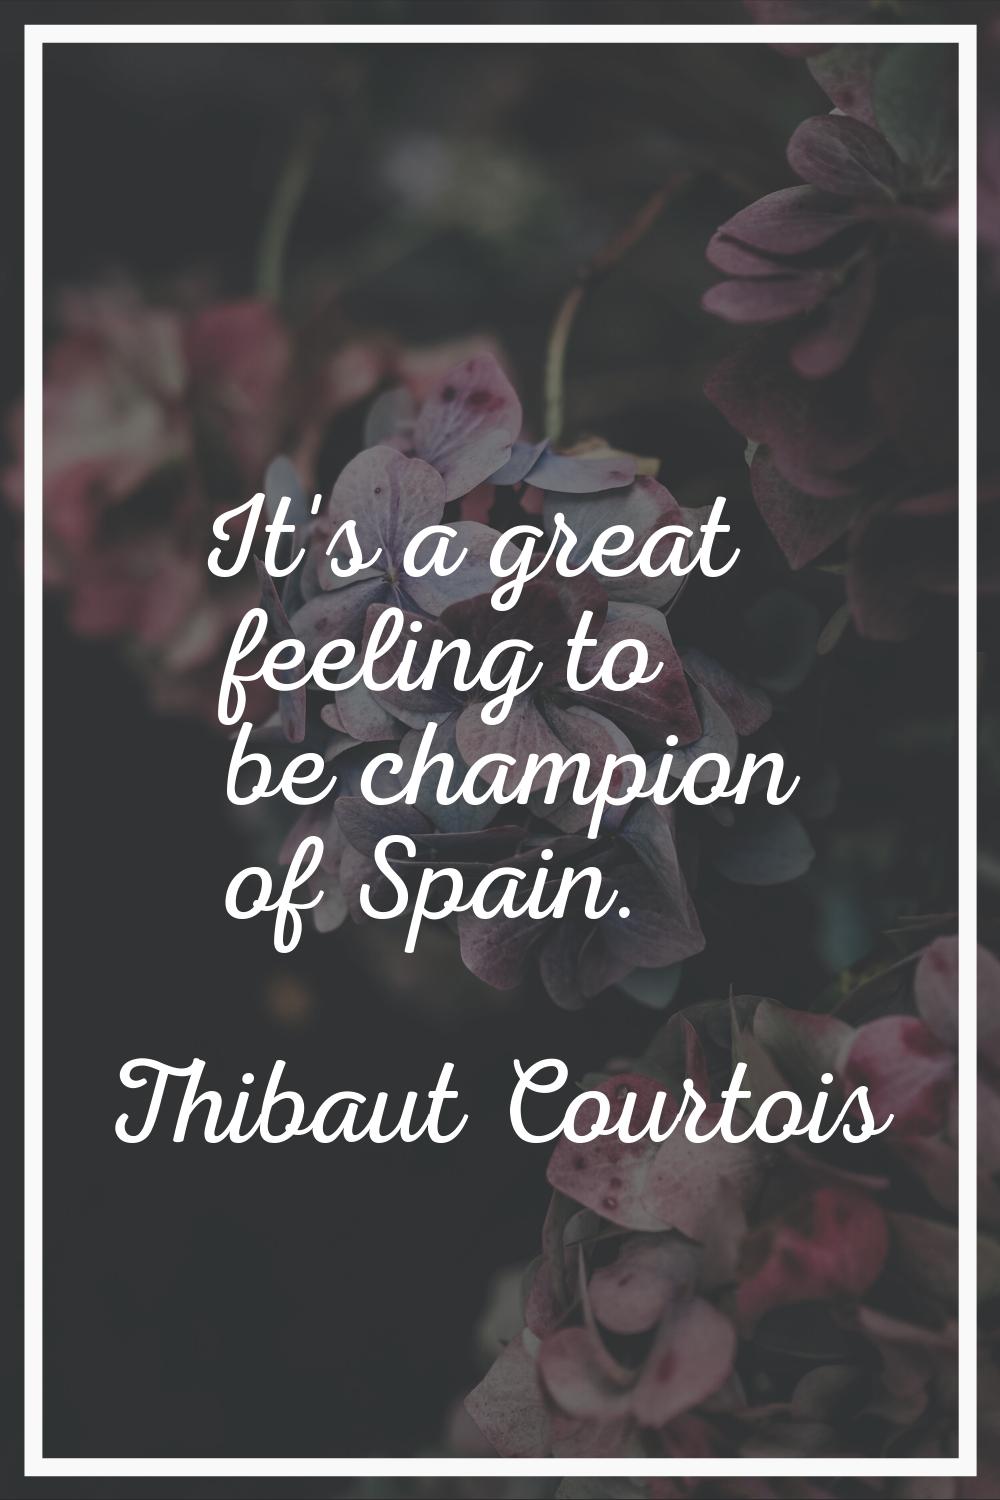 It's a great feeling to be champion of Spain.